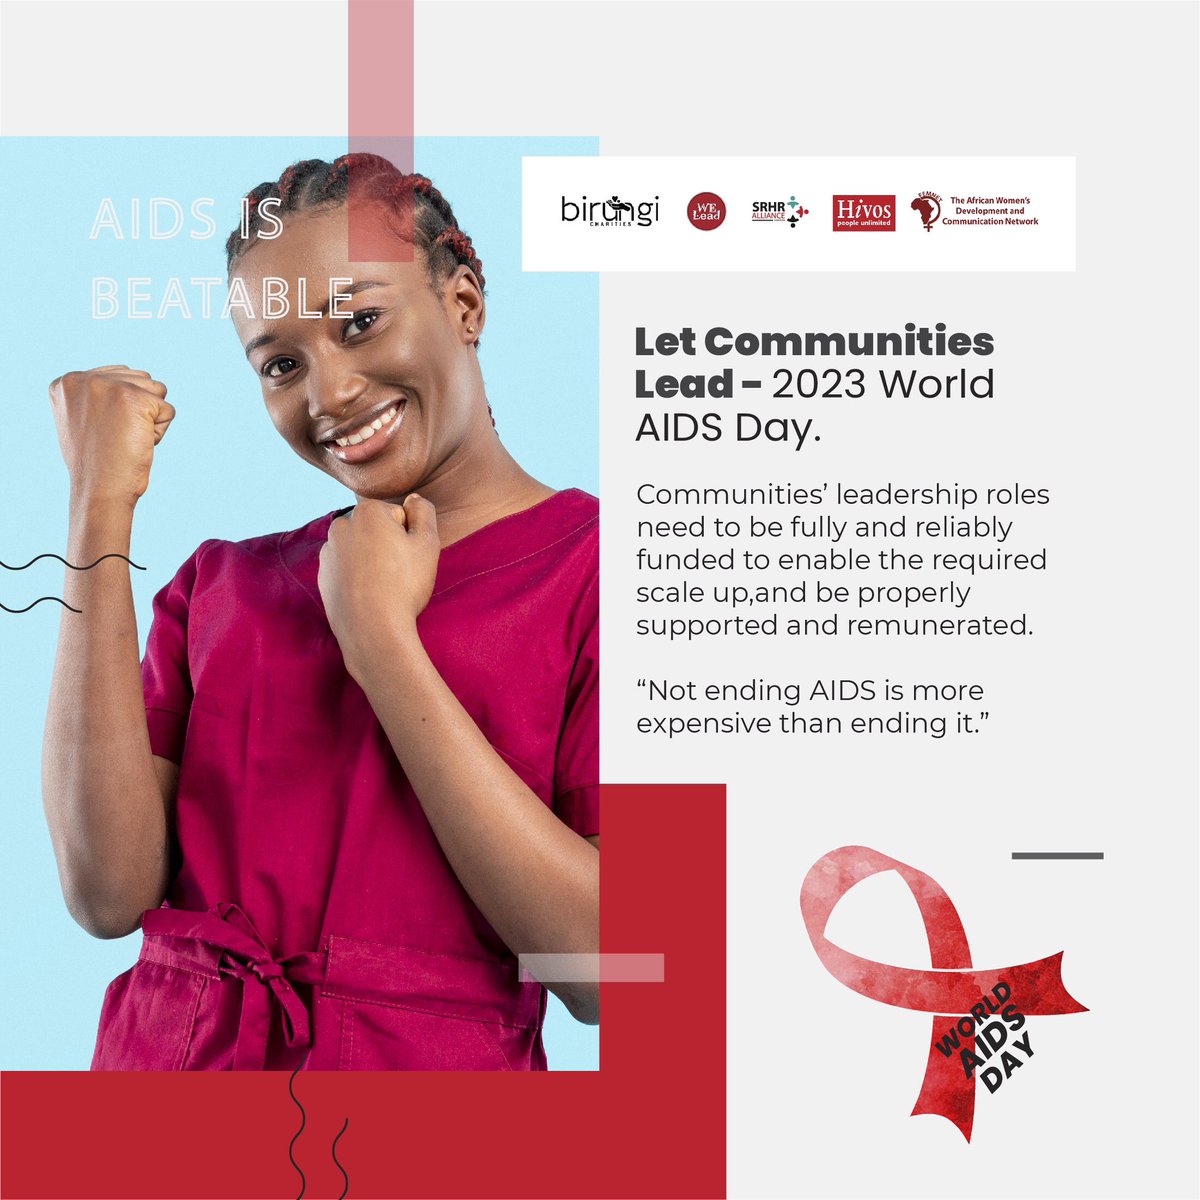 The world can end AIDS, with communities leading the way. Organisations of communities living with, at risk of, or affected by HIV are the frontline of progress in the HIV response.

#WorldAidsDay
#WorldsAidsDay2023  
#WeLeadOurSRHR